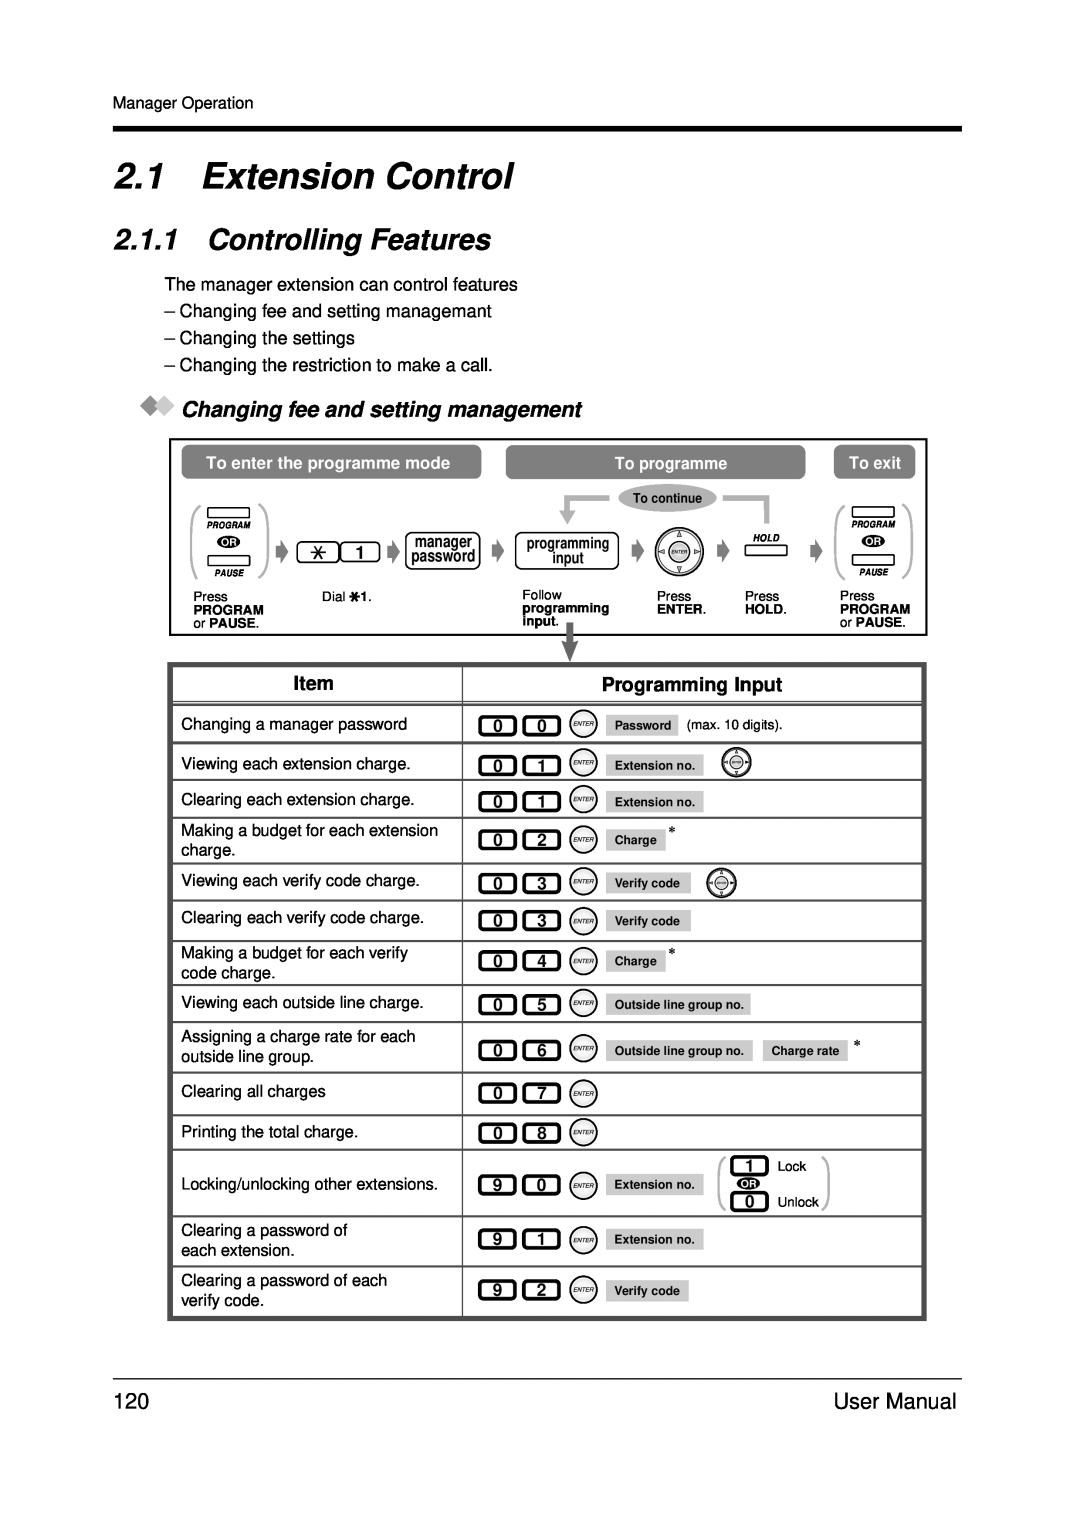 Panasonic KX-TDA200 user manual 2.1Extension Control, 2.1.1Controlling Features, Changing fee and setting management 